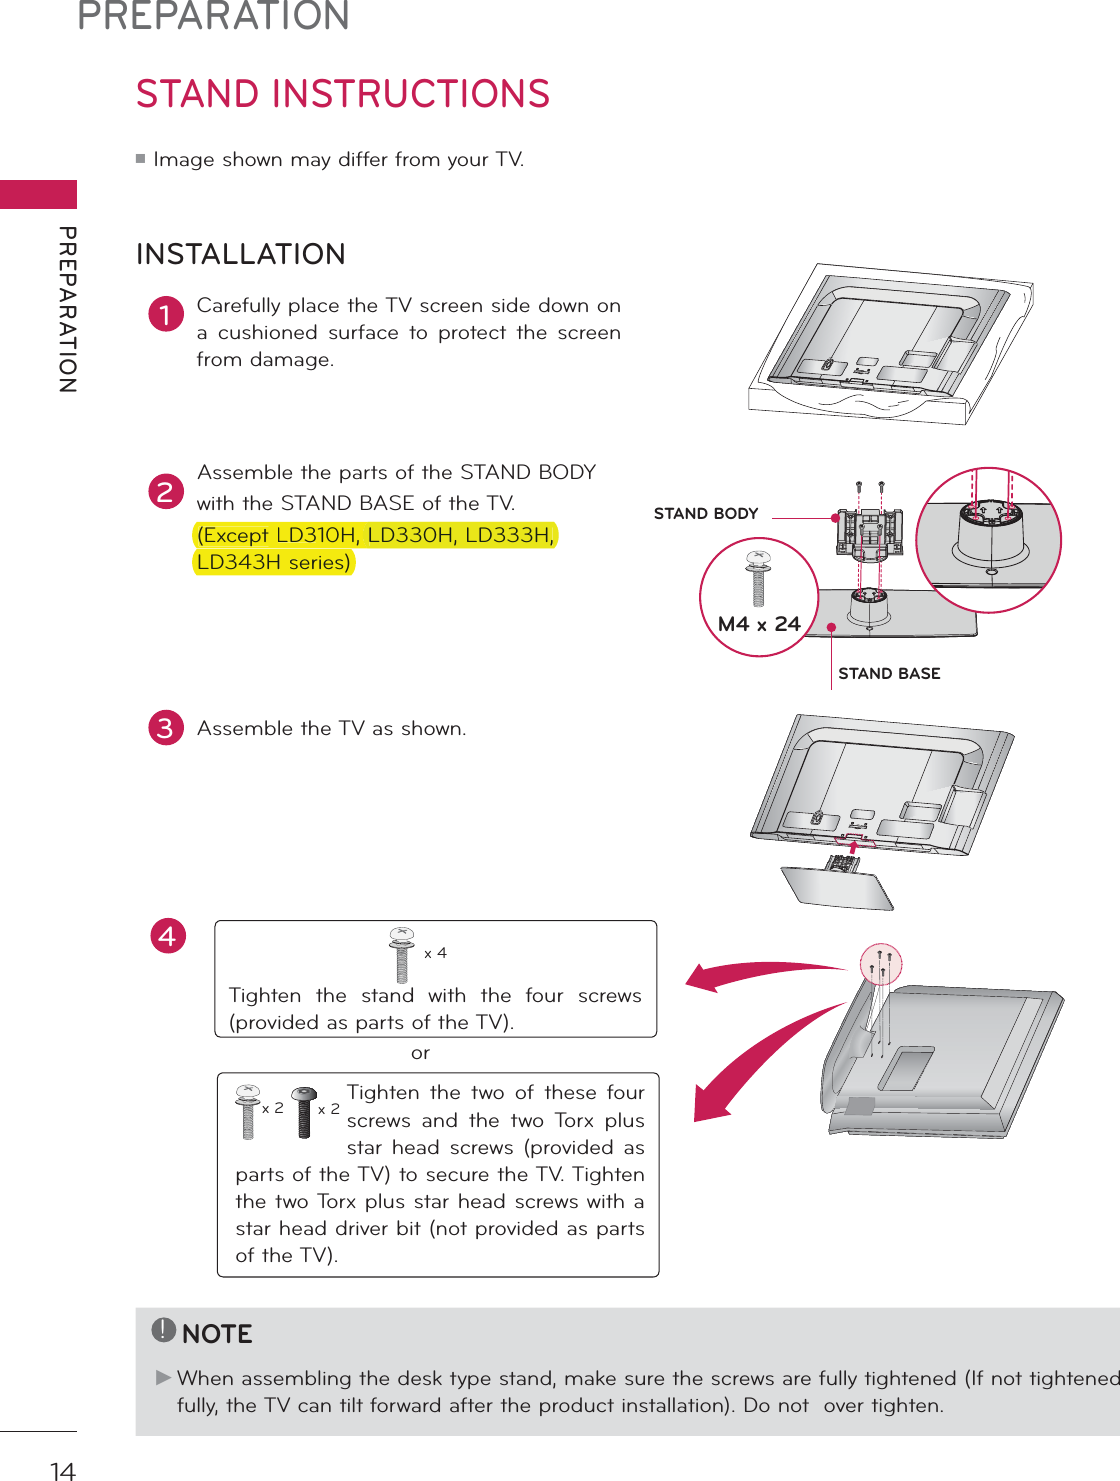 PREPARATIONPREPARATION14STAND INSTRUCTIONS ᯫ Image shown may differ from your TV.1Carefully place the TV screen side down on a cushioned surface to protect the screen from damage.2Assemble the parts of the STAND BODYwith the STAND BASE of the TV. (Except LD310H, LD330H, LD333H, LD343H series)INSTALLATION!NOTE When assembling the desk type stand, make sure the screws are fully tightened (If not tightened fully, the TV can tilt forward after the product installation). Do not  over tighten.3Assemble the TV as shown.Tighten the stand with the four screws (provided as parts of the TV).x 4orTighten the two of these four screws and the two Torx plus star head screws (provided as parts of the TV) to secure the TV. Tighten the two Torx plus star head screws with a star head driver bit (not provided as parts of the TV).x 2 x 2M4 x 24STAND BASESTAND BODYAC  INCABLE  MANAGEMENTAC  INCABLE  MANAGEMENT4(ExceptLD310H,LD330H,LD333H,LD343Hseries)